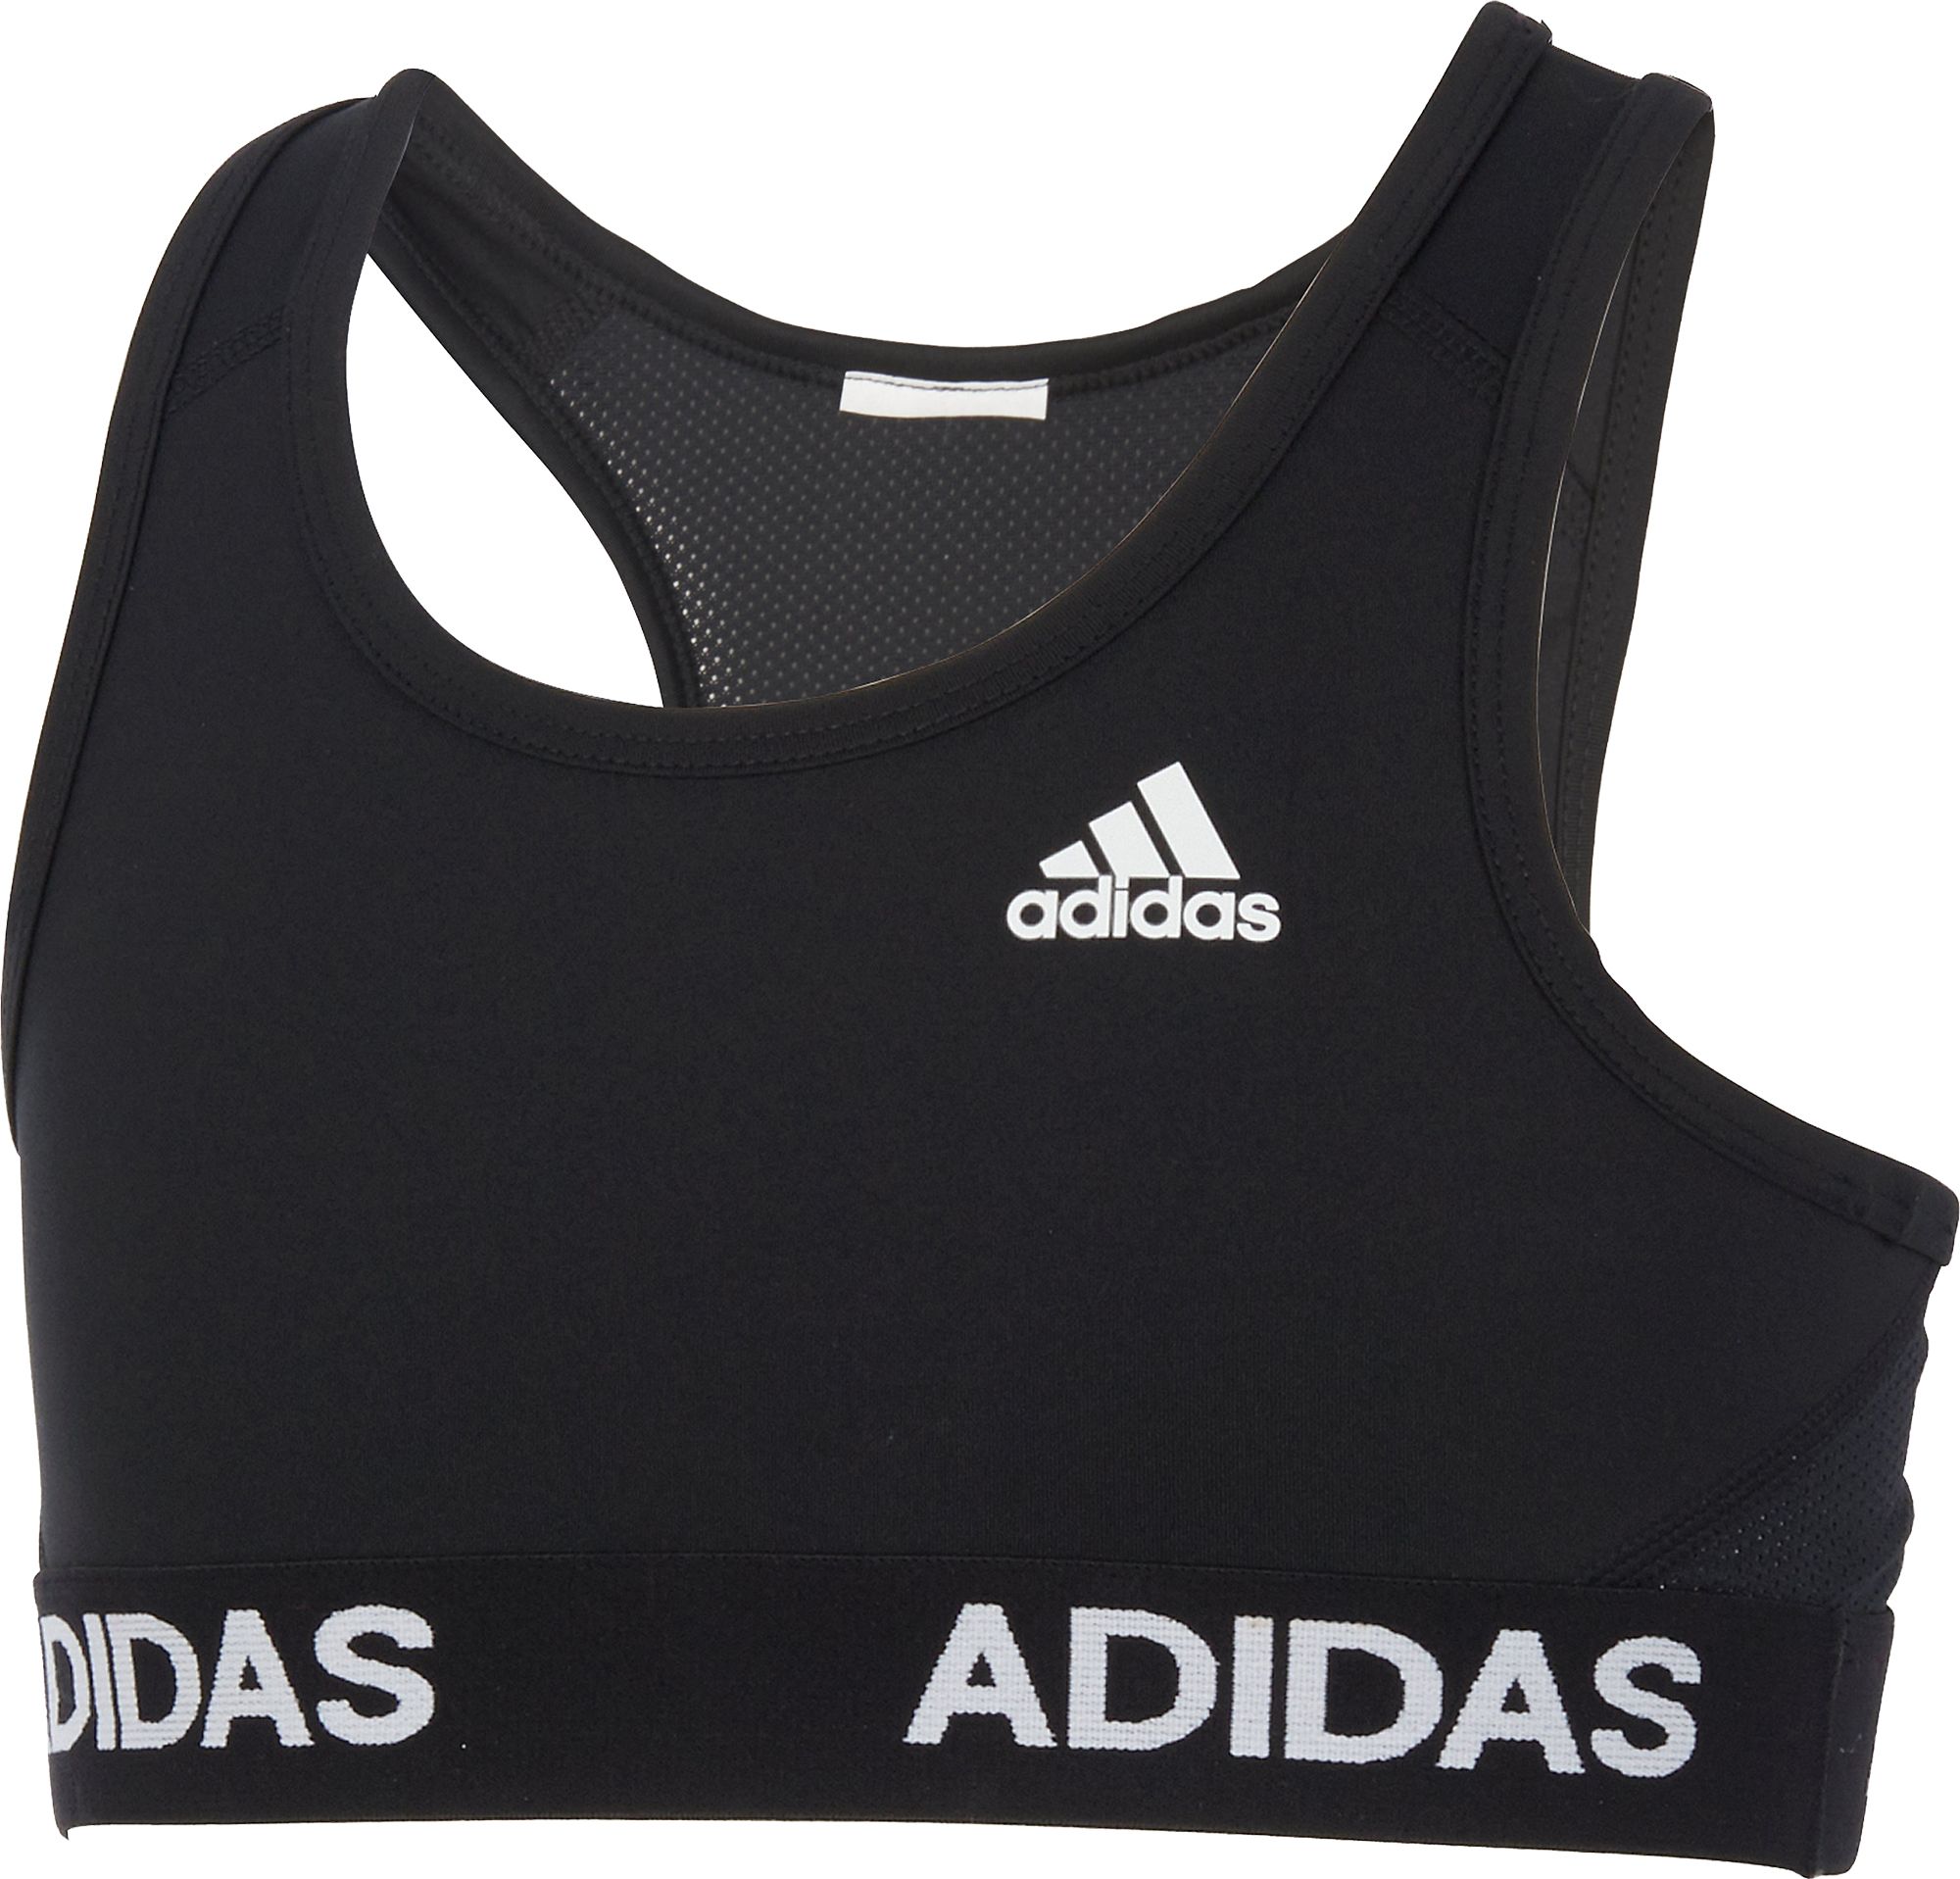 adidas girls outfit